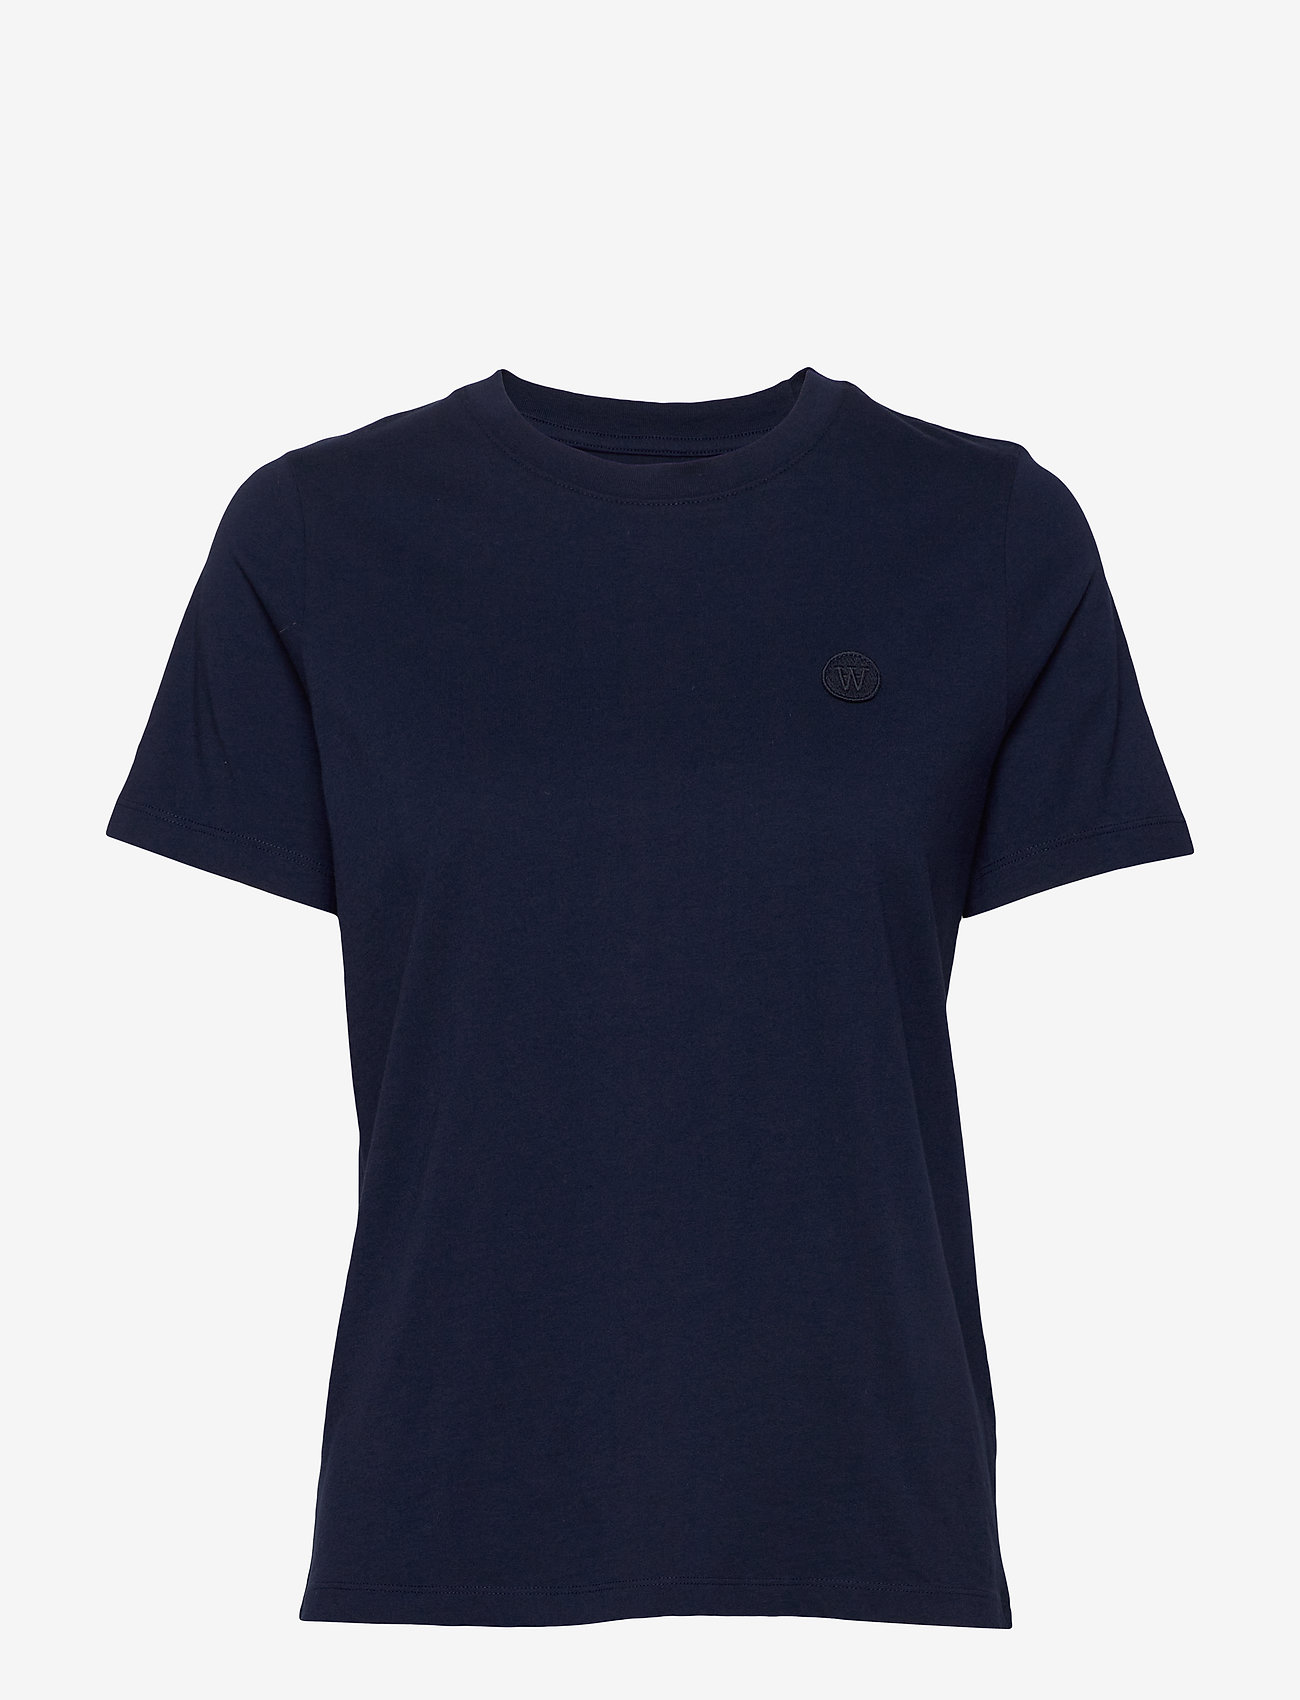 Double A by Wood Wood - Mia T-shirt - t-shirts & tops - navy - 0